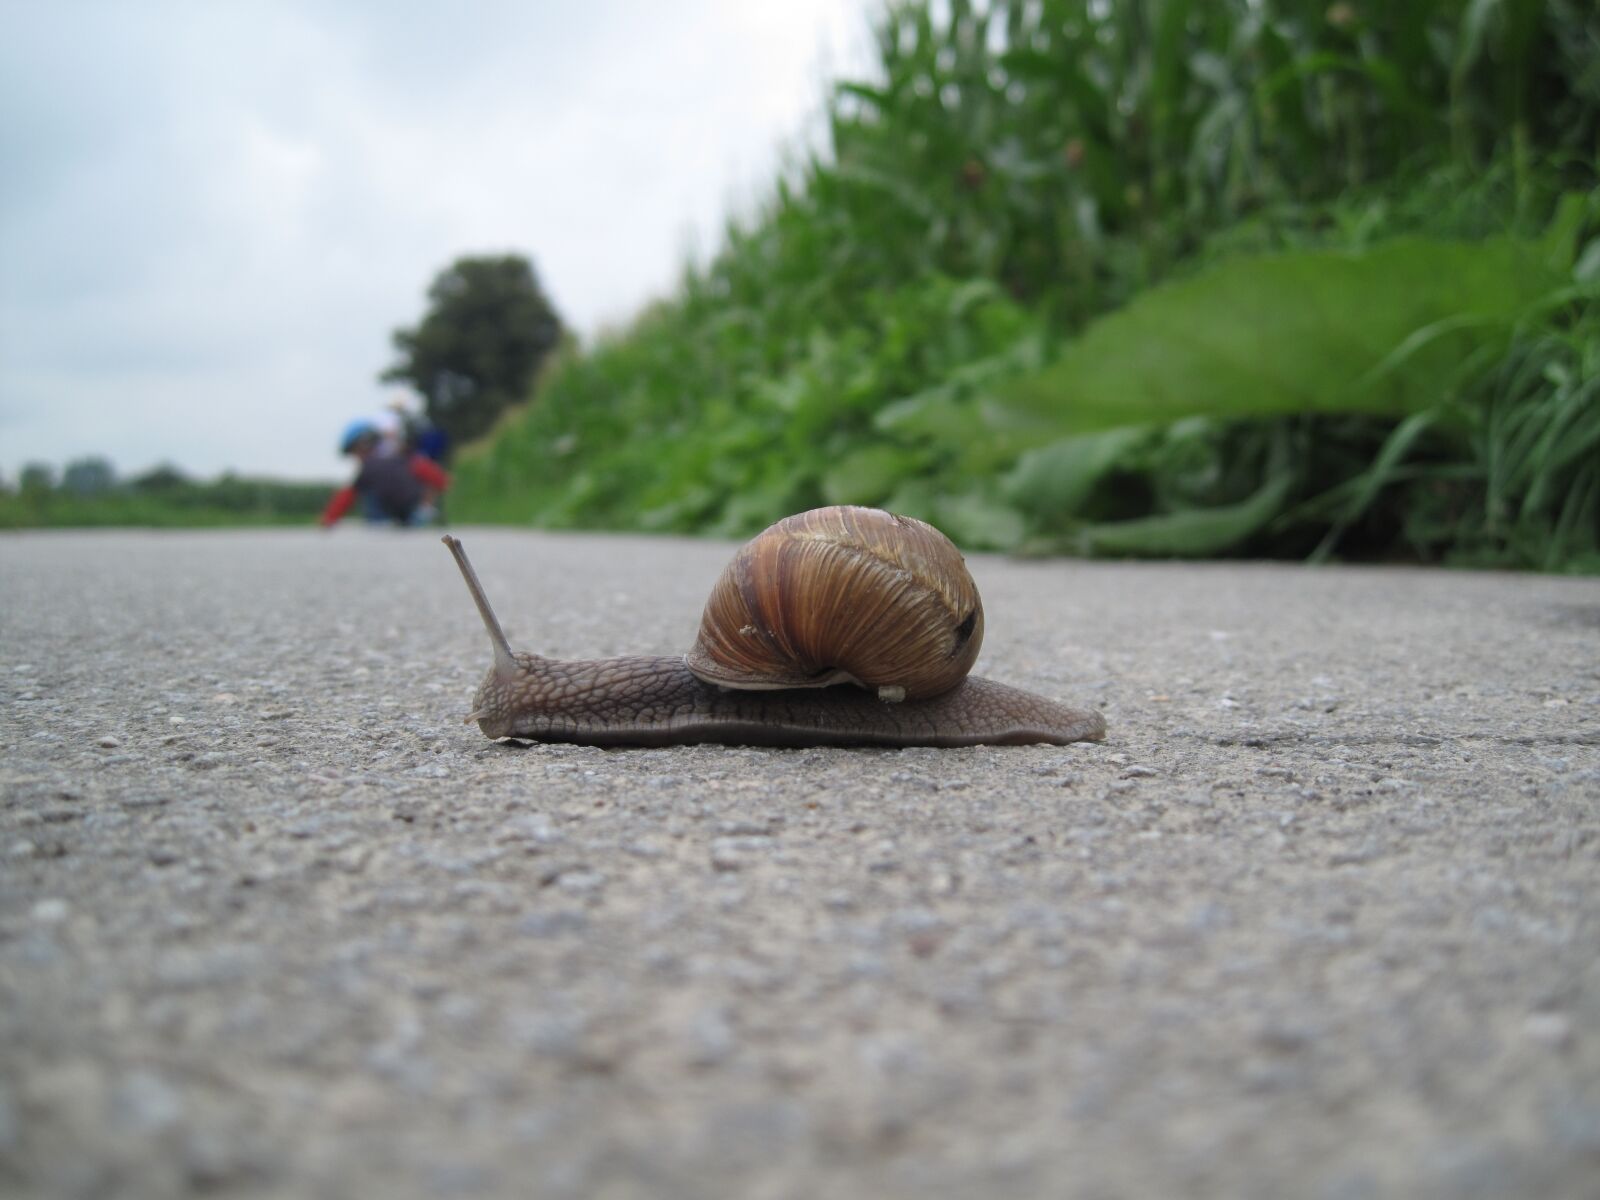 Canon PowerShot SD990 IS (Digital IXUS 980 IS / IXY Digital 3000 IS) sample photo. Snail, road, casing photography